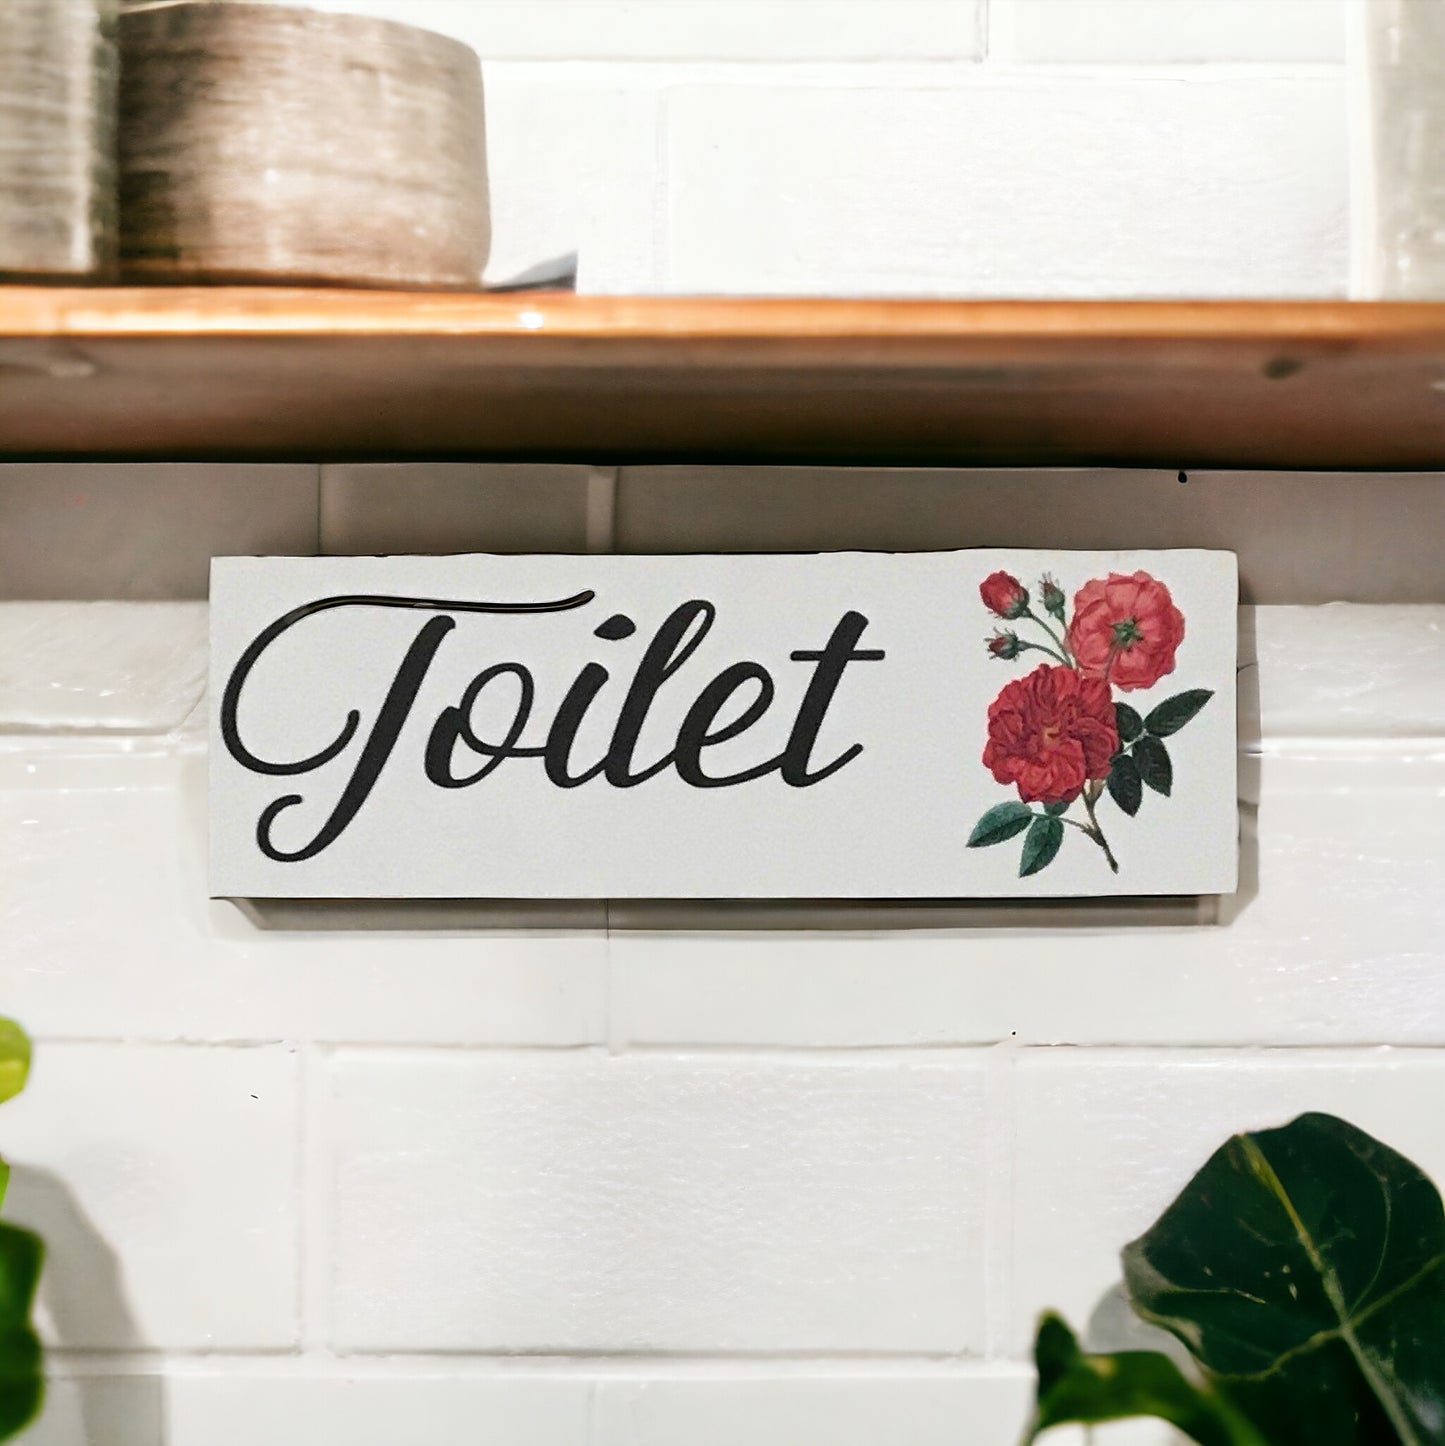 Red Rose Bud Toilet Laundry Bathroom Sign - The Renmy Store Homewares & Gifts 